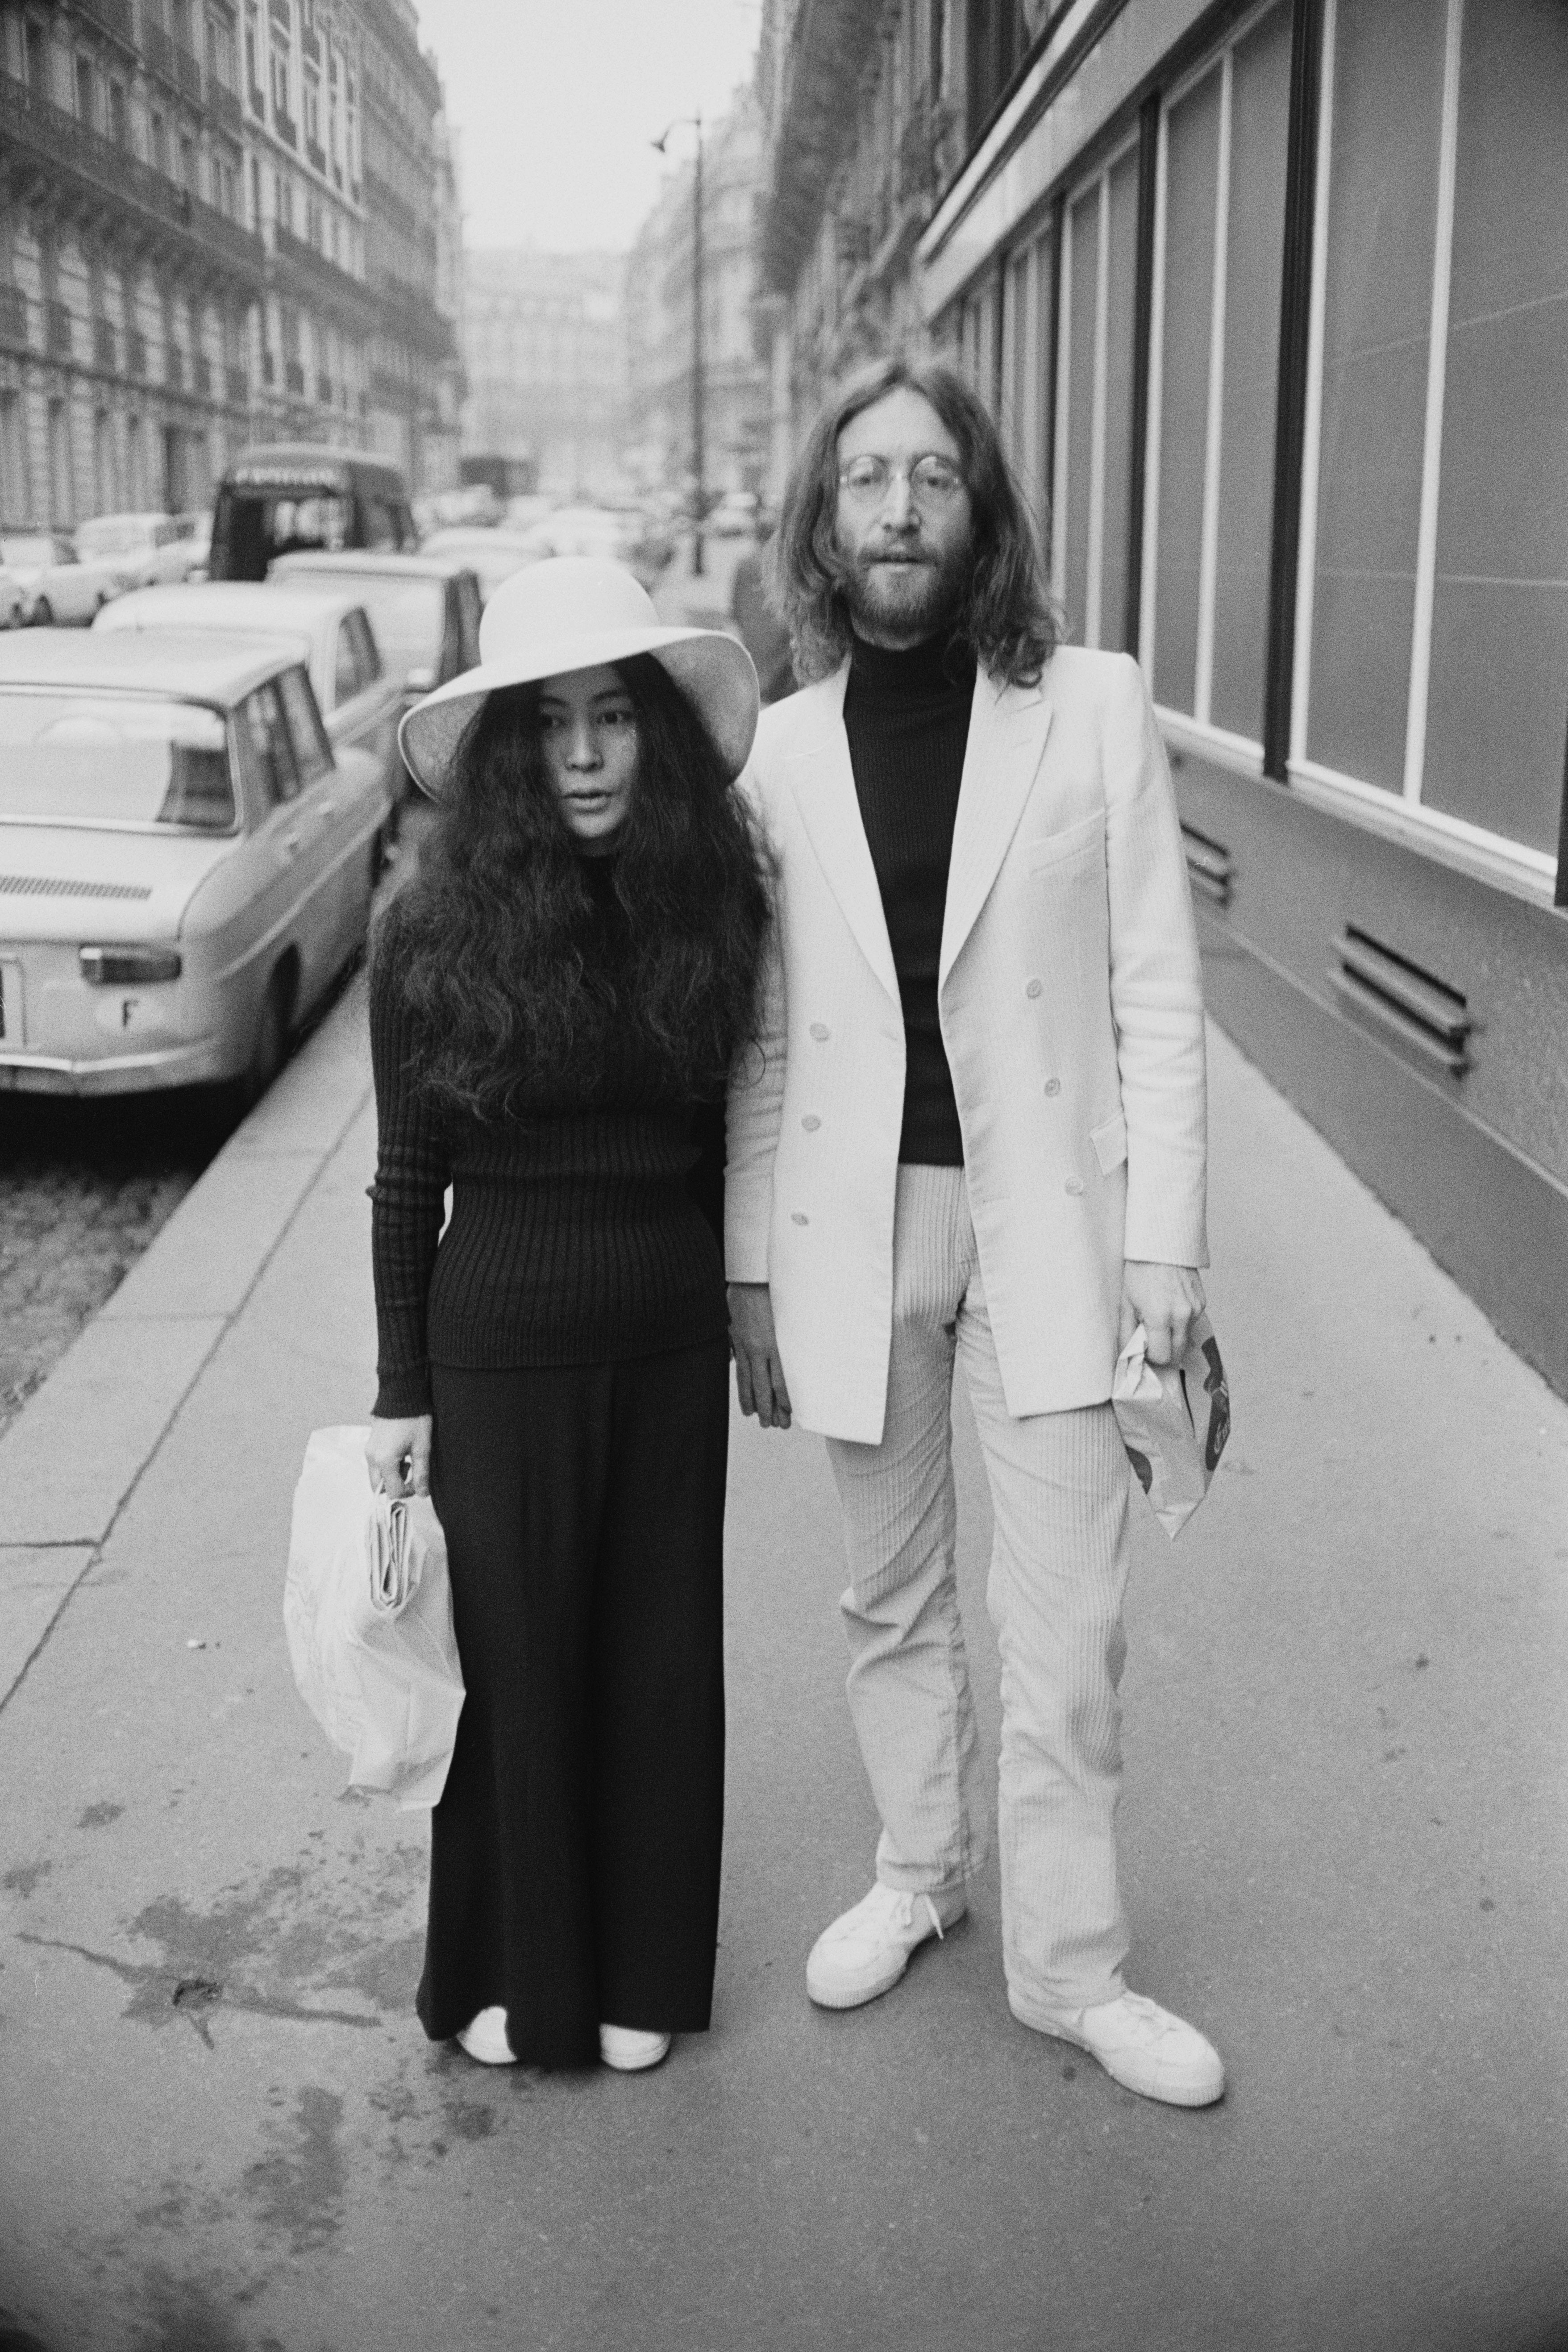 Newlyweds: Ono and Lennon on their honeymoon in Paris in 1969